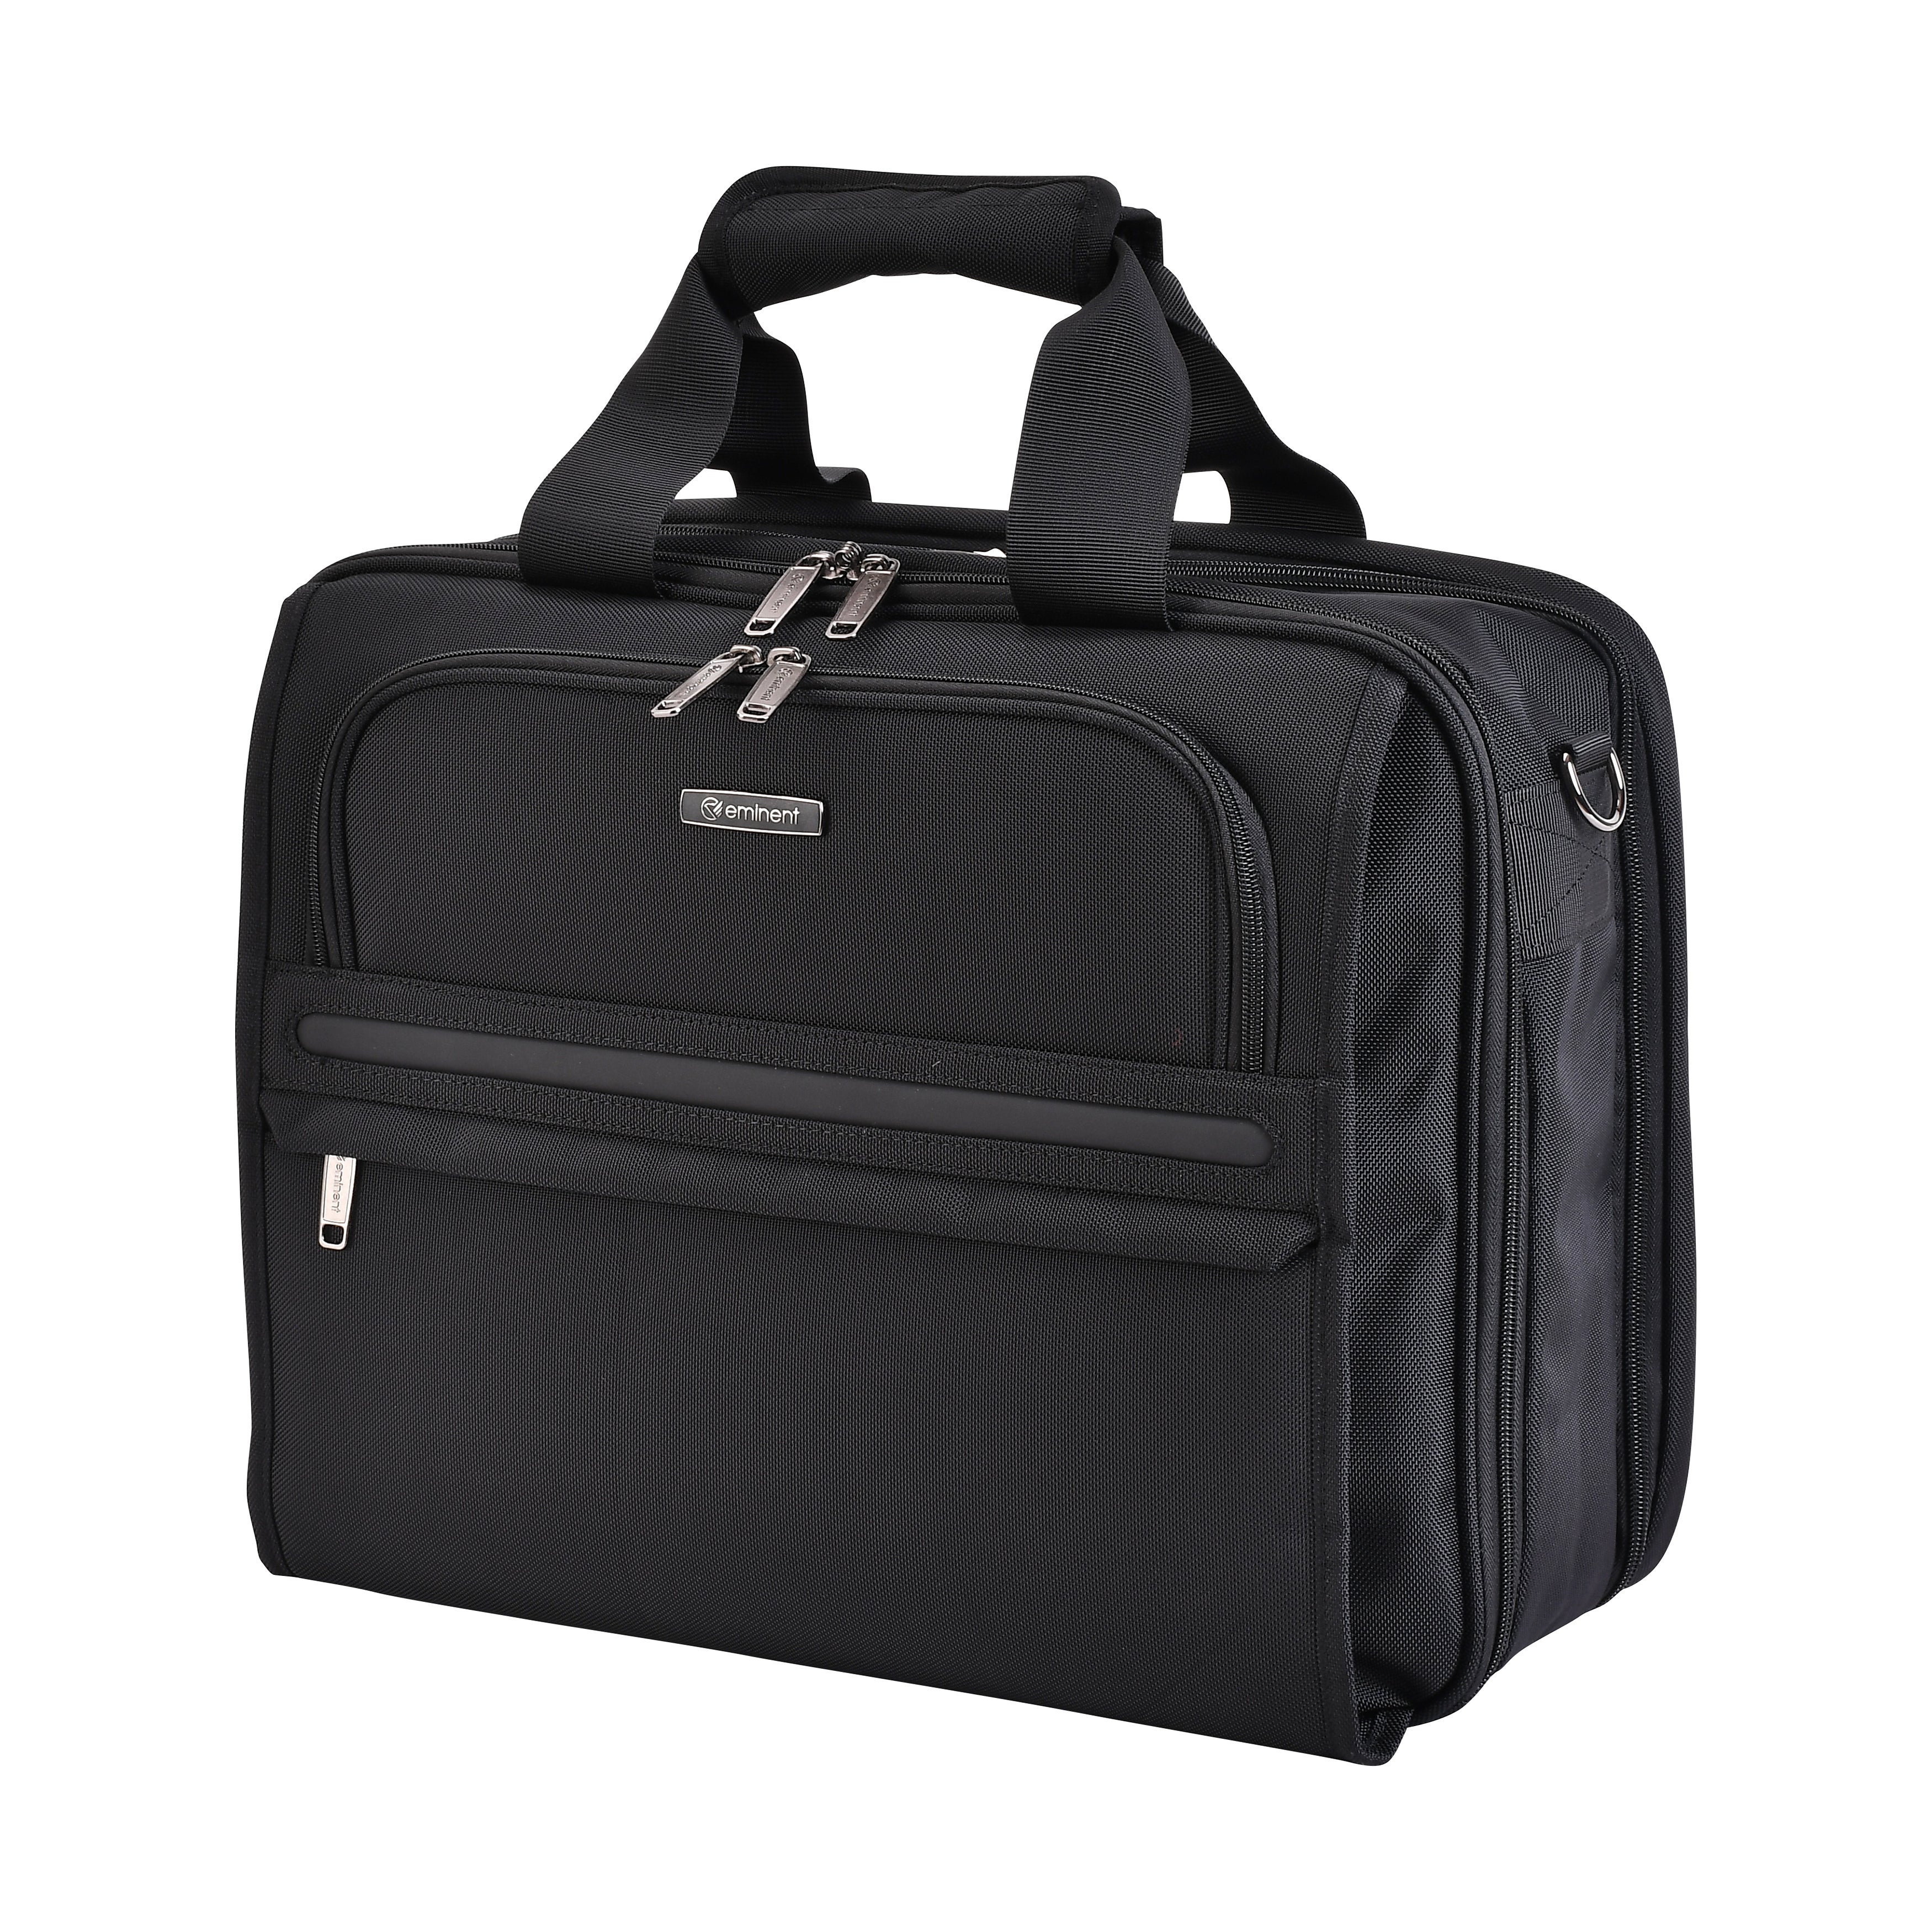 Eminent Move Air NEO, Large and Durable – Eminent Luggage